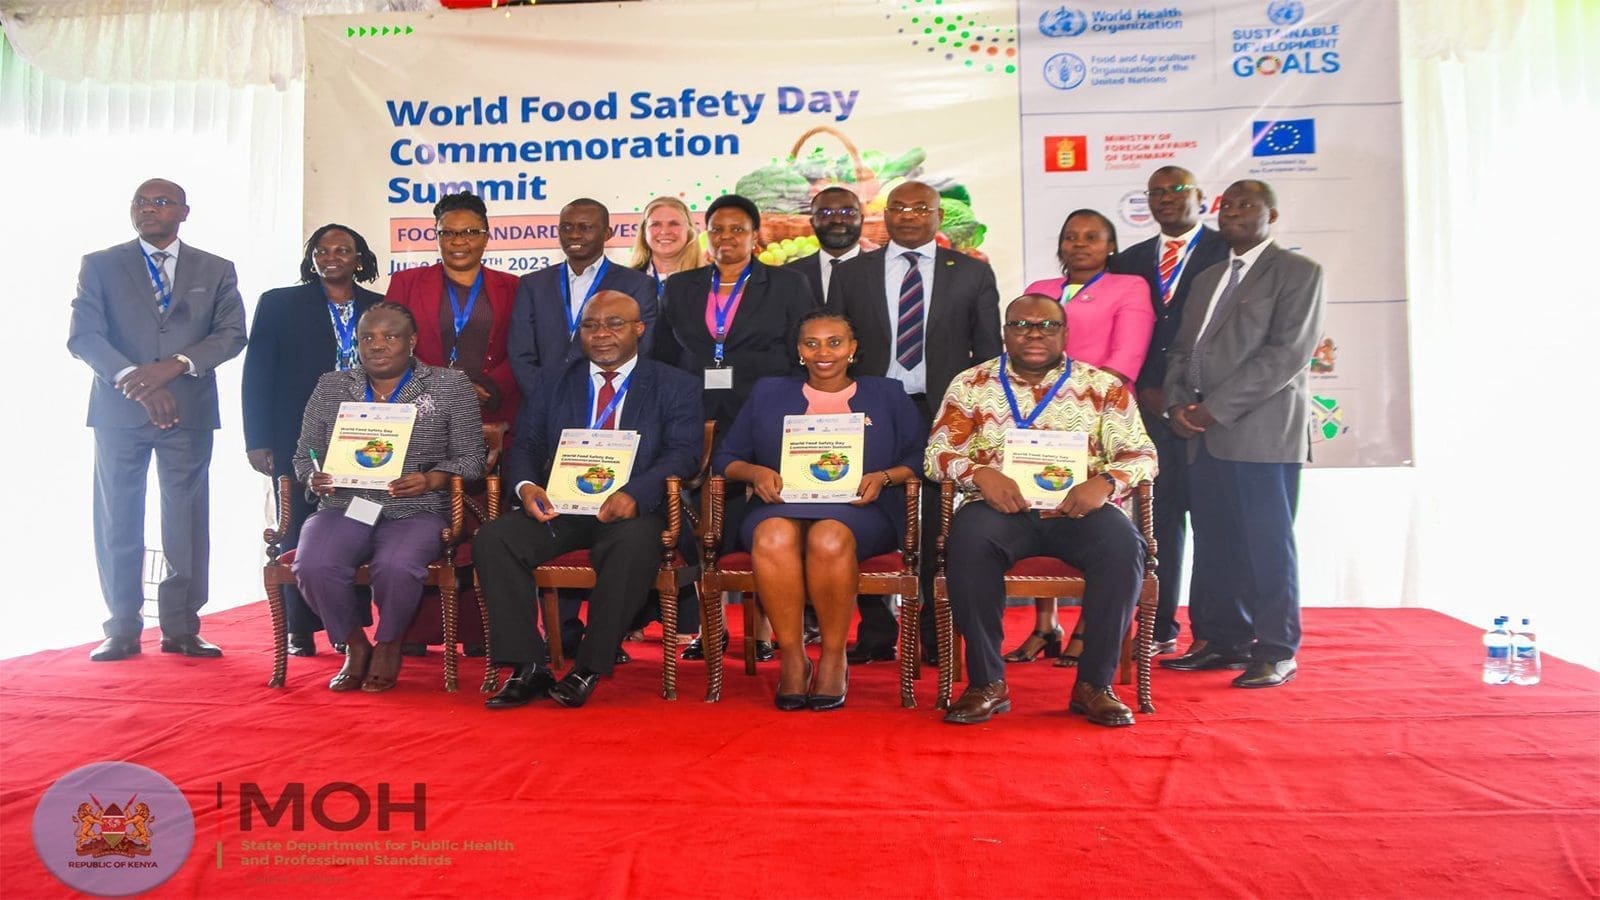 World Food Safety Day 2023 in Kenya culminates with adoption of joint Food Safety Commitment  Statement